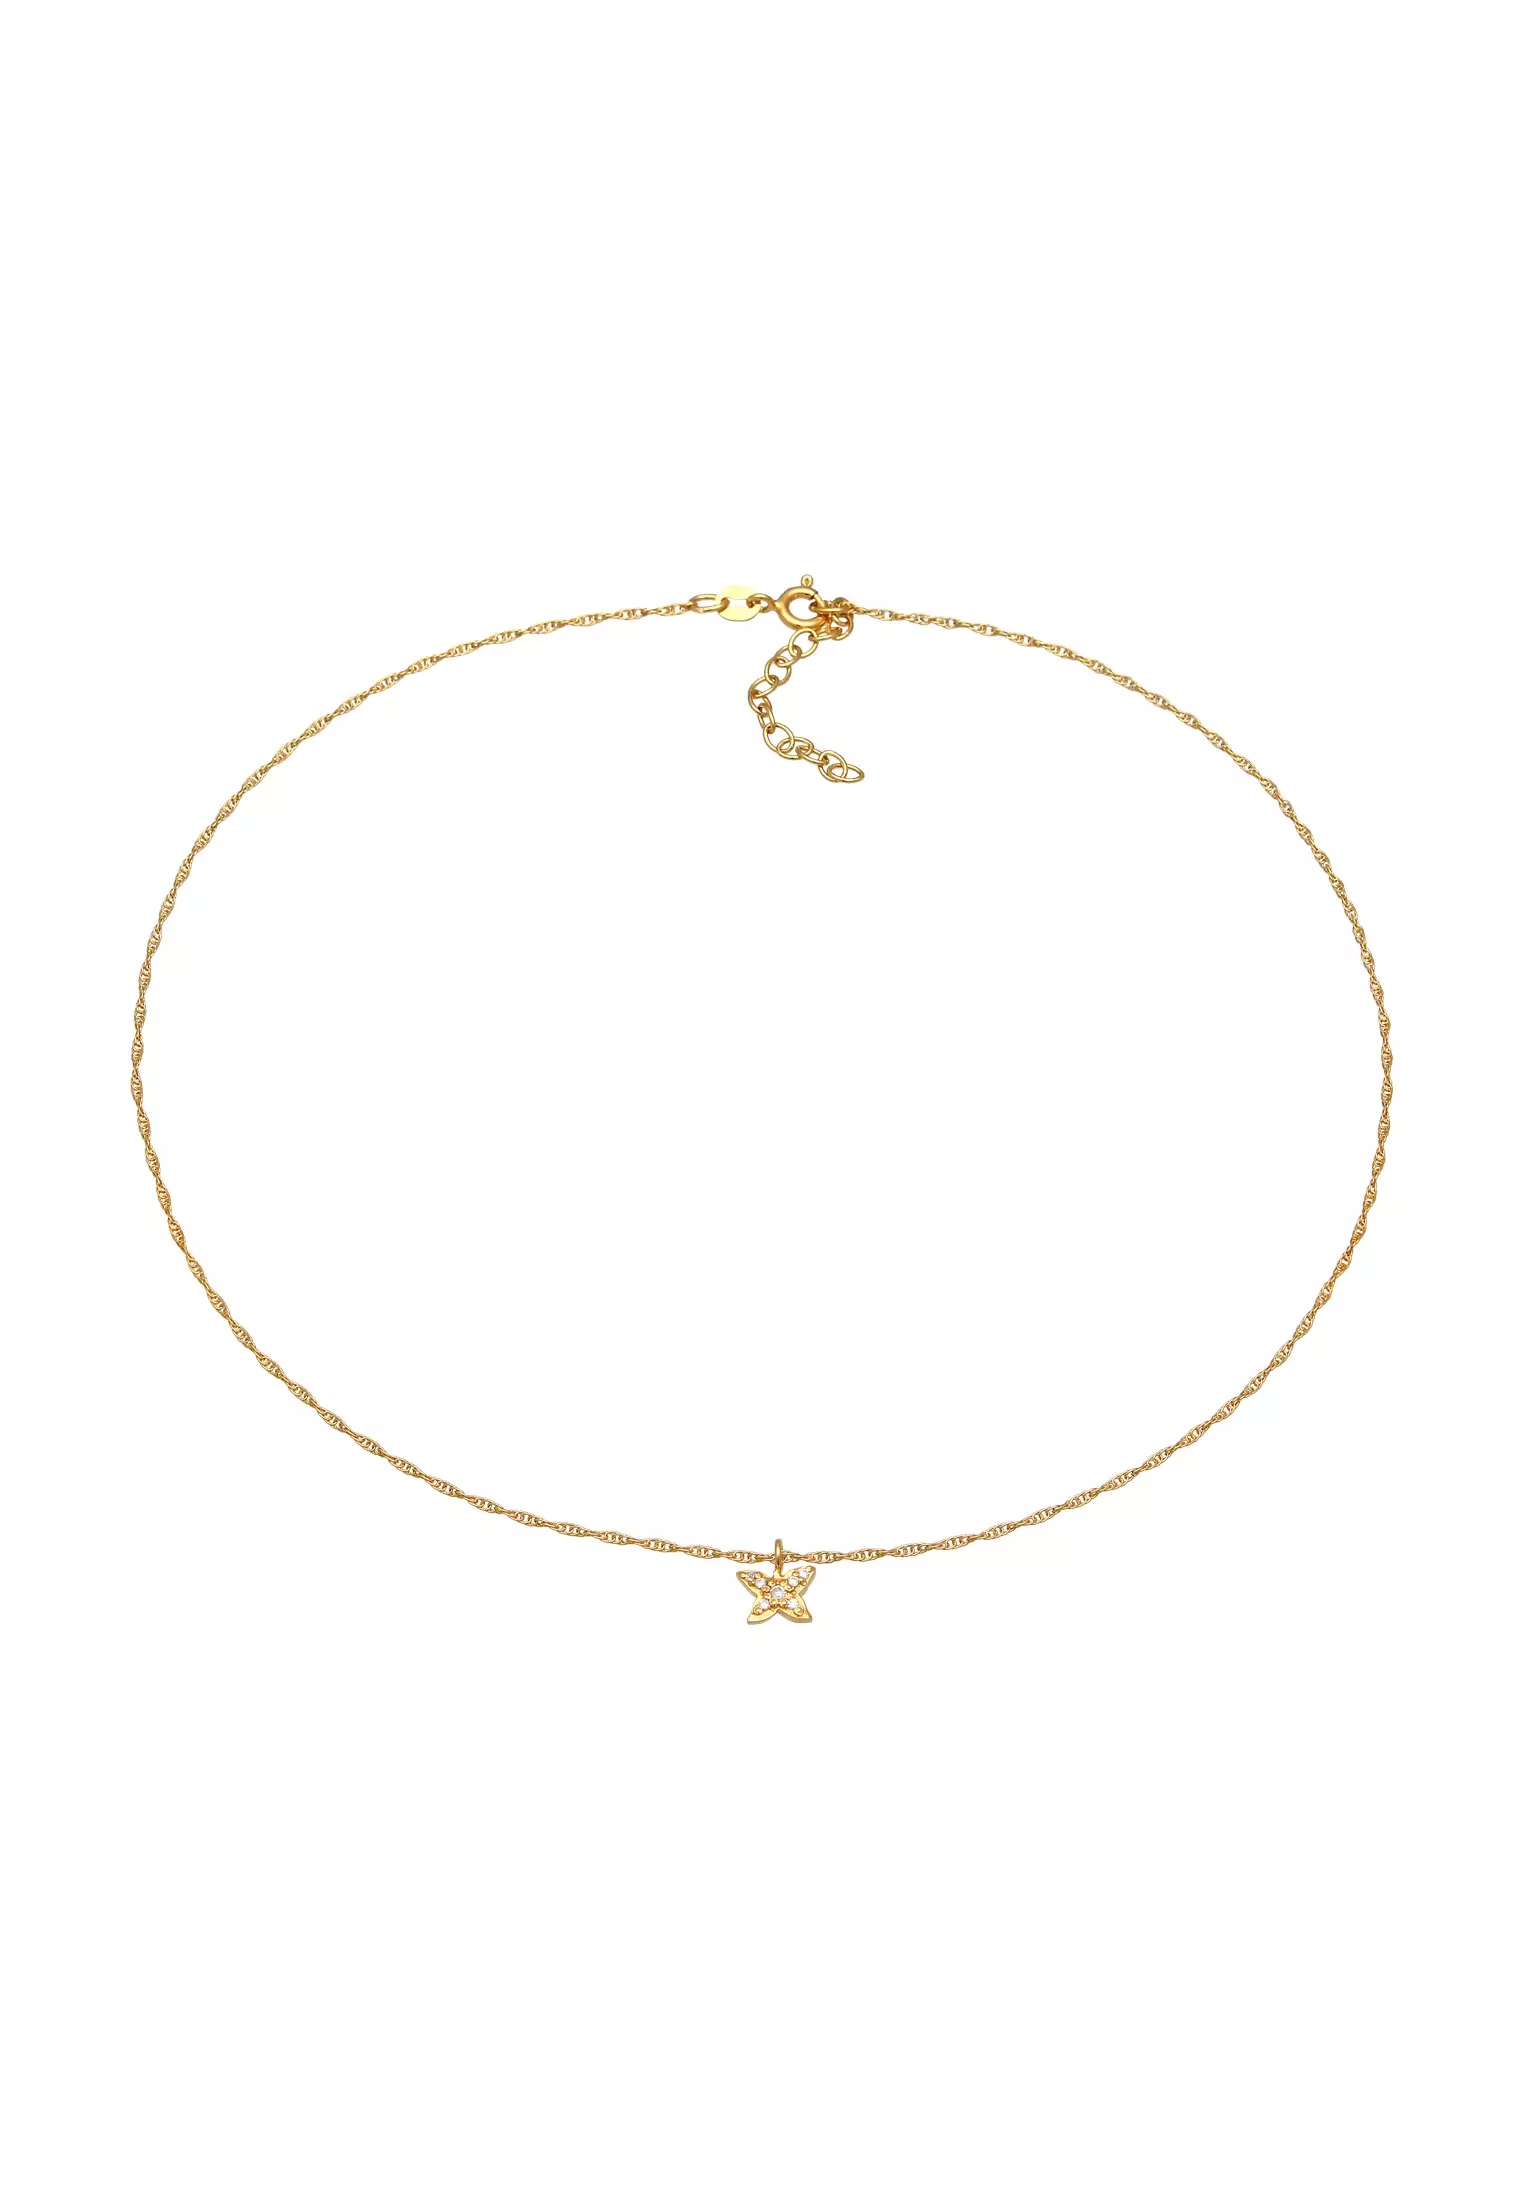 Necklace Choker Butterfly Pendant Zirconia Crystals Gold Plated